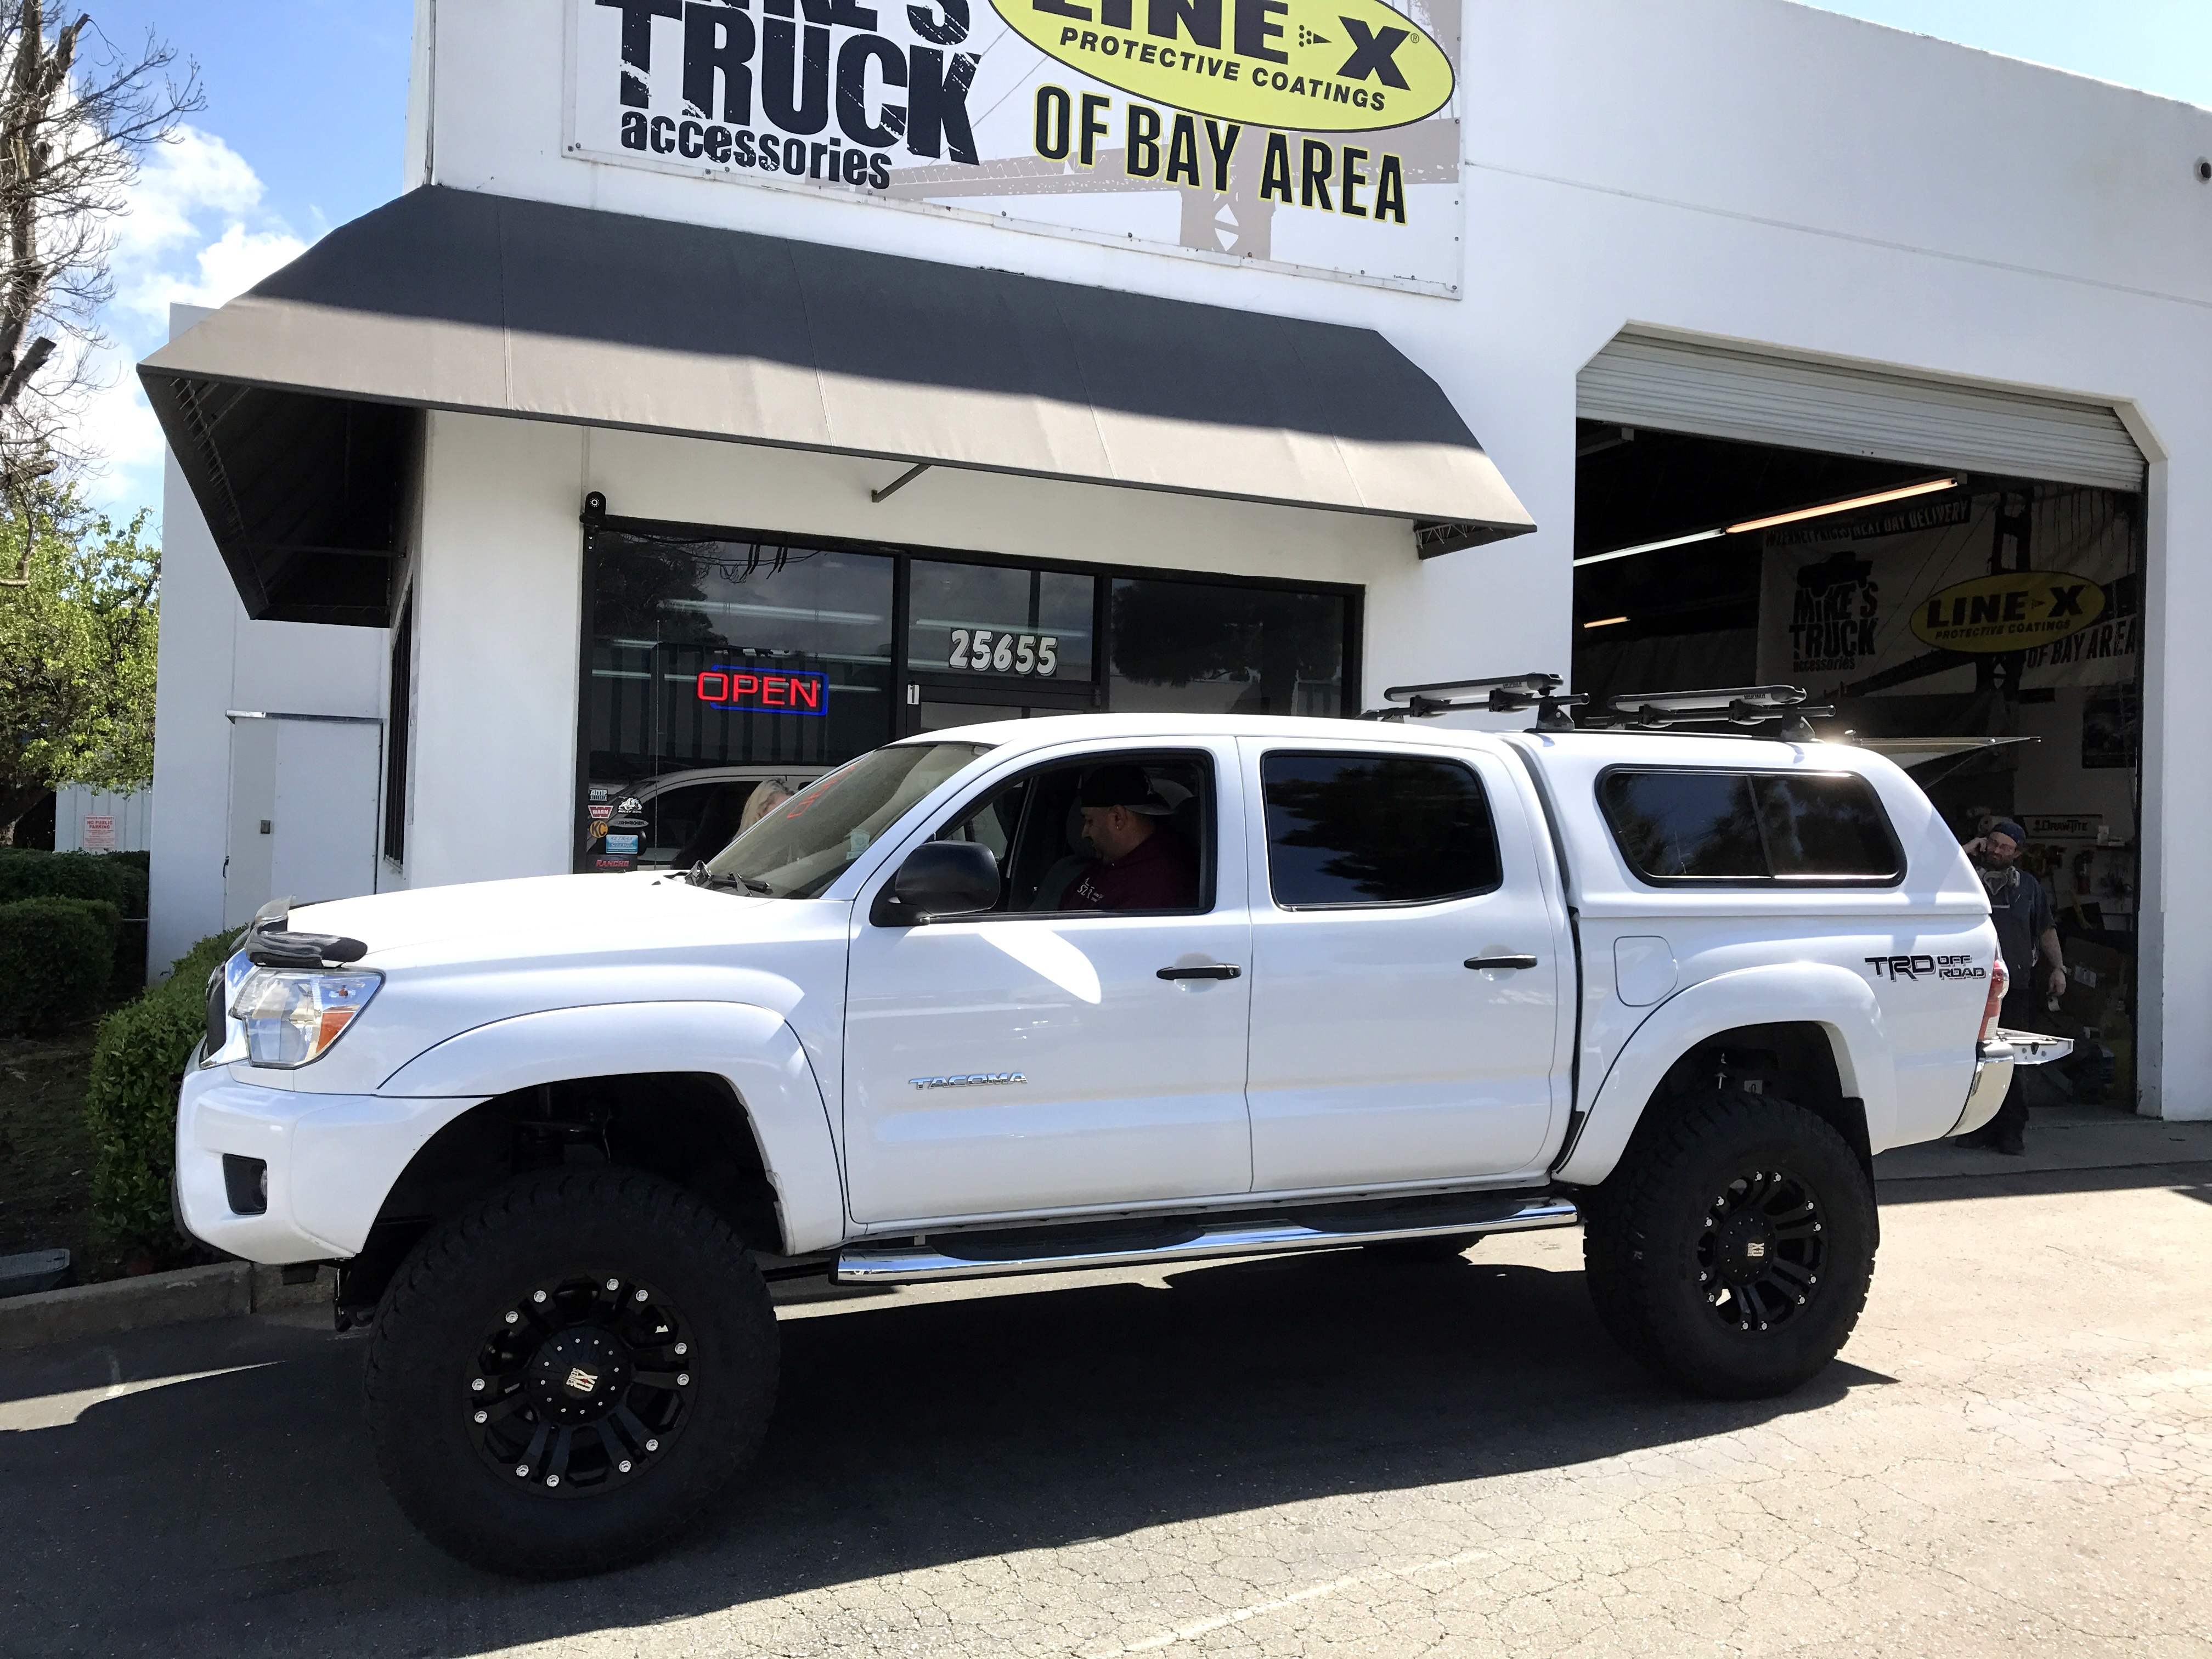 2012 Toyota Tacoma (After) - Installed 6" Fabtech Suspension Lift, 18X9 Monster II Rims, 35X9X12.50 R18 Toyo Open Country AT II Tires